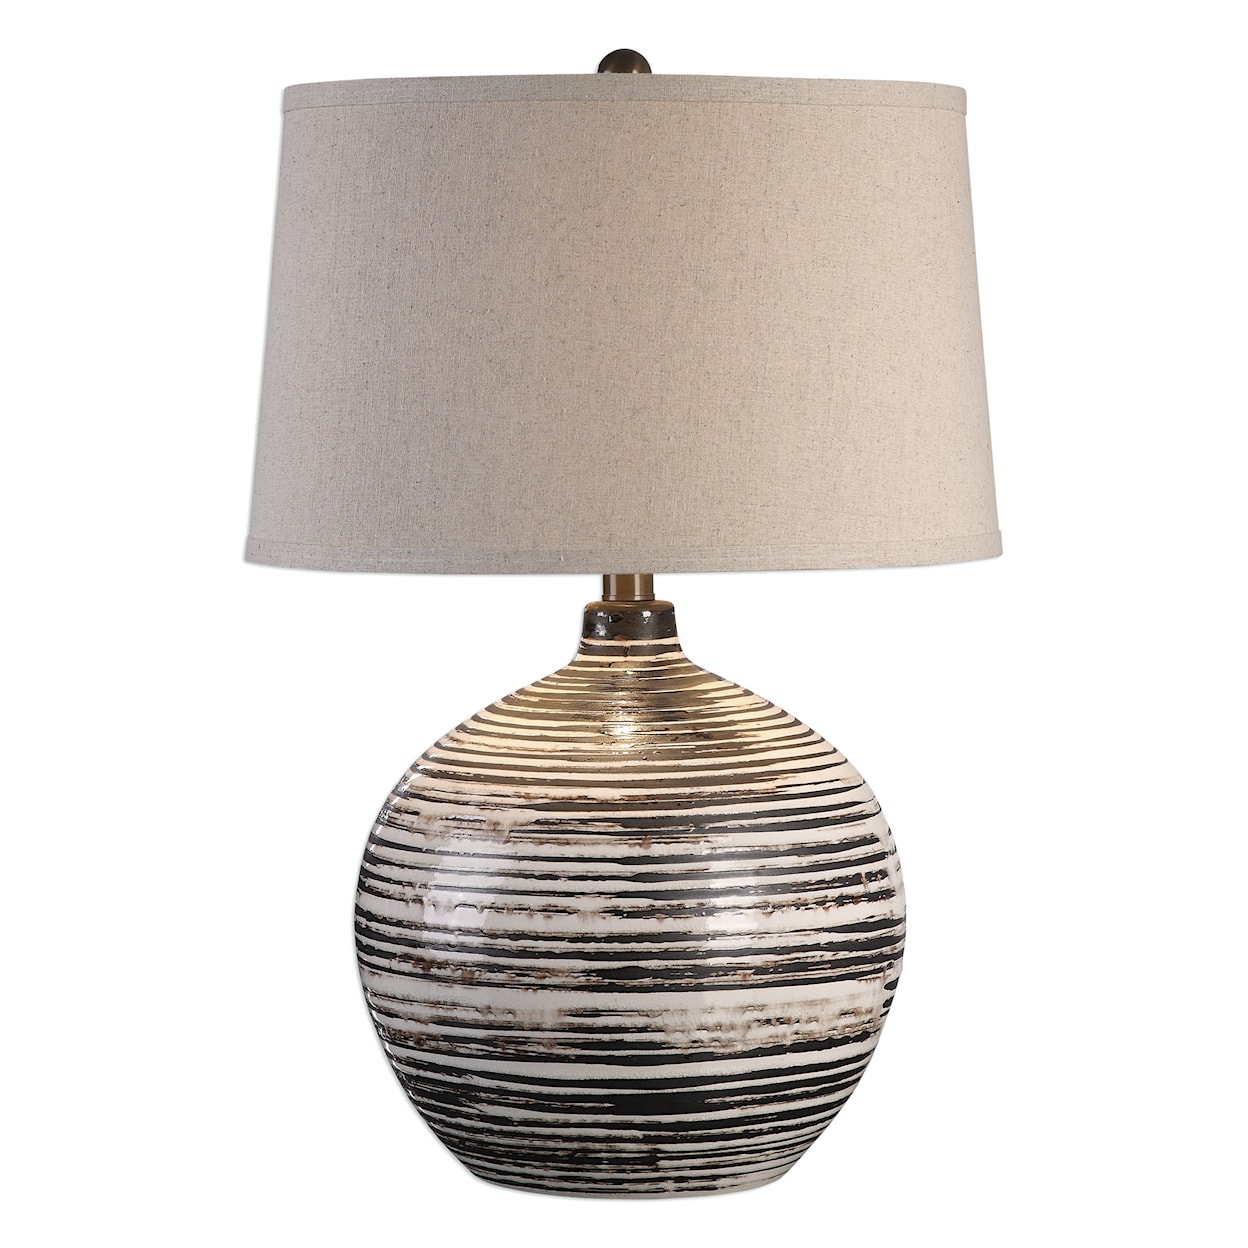 Uttermost Table Lamps Bloxom Table Lamp